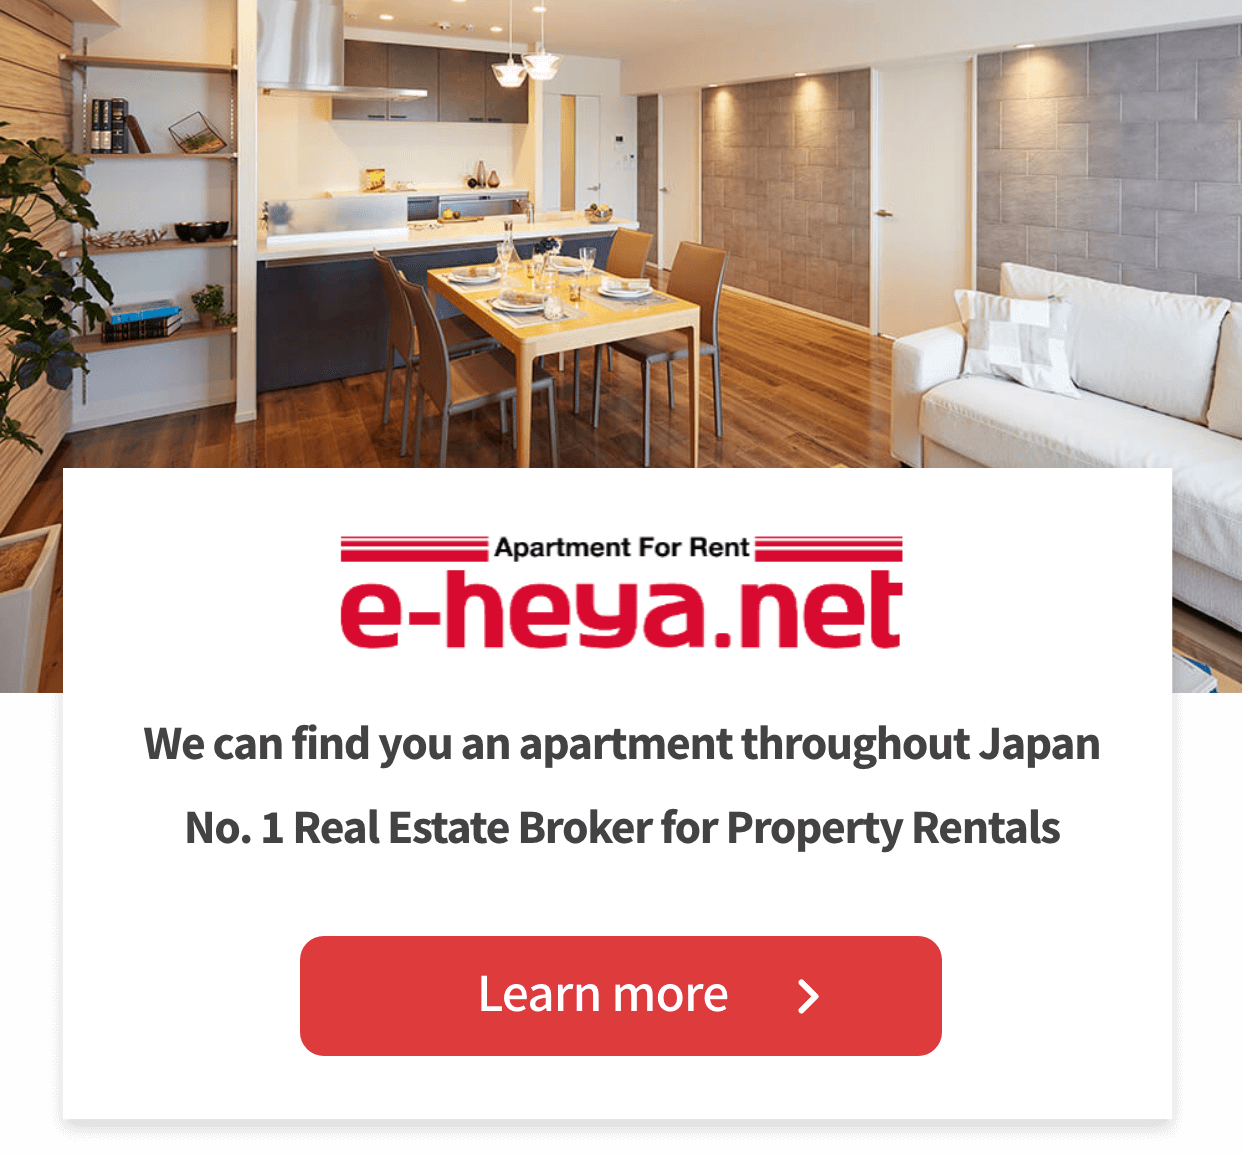 We can find you an apartment throughout Japan No. 1 Real Estate Broker for Property Rentals